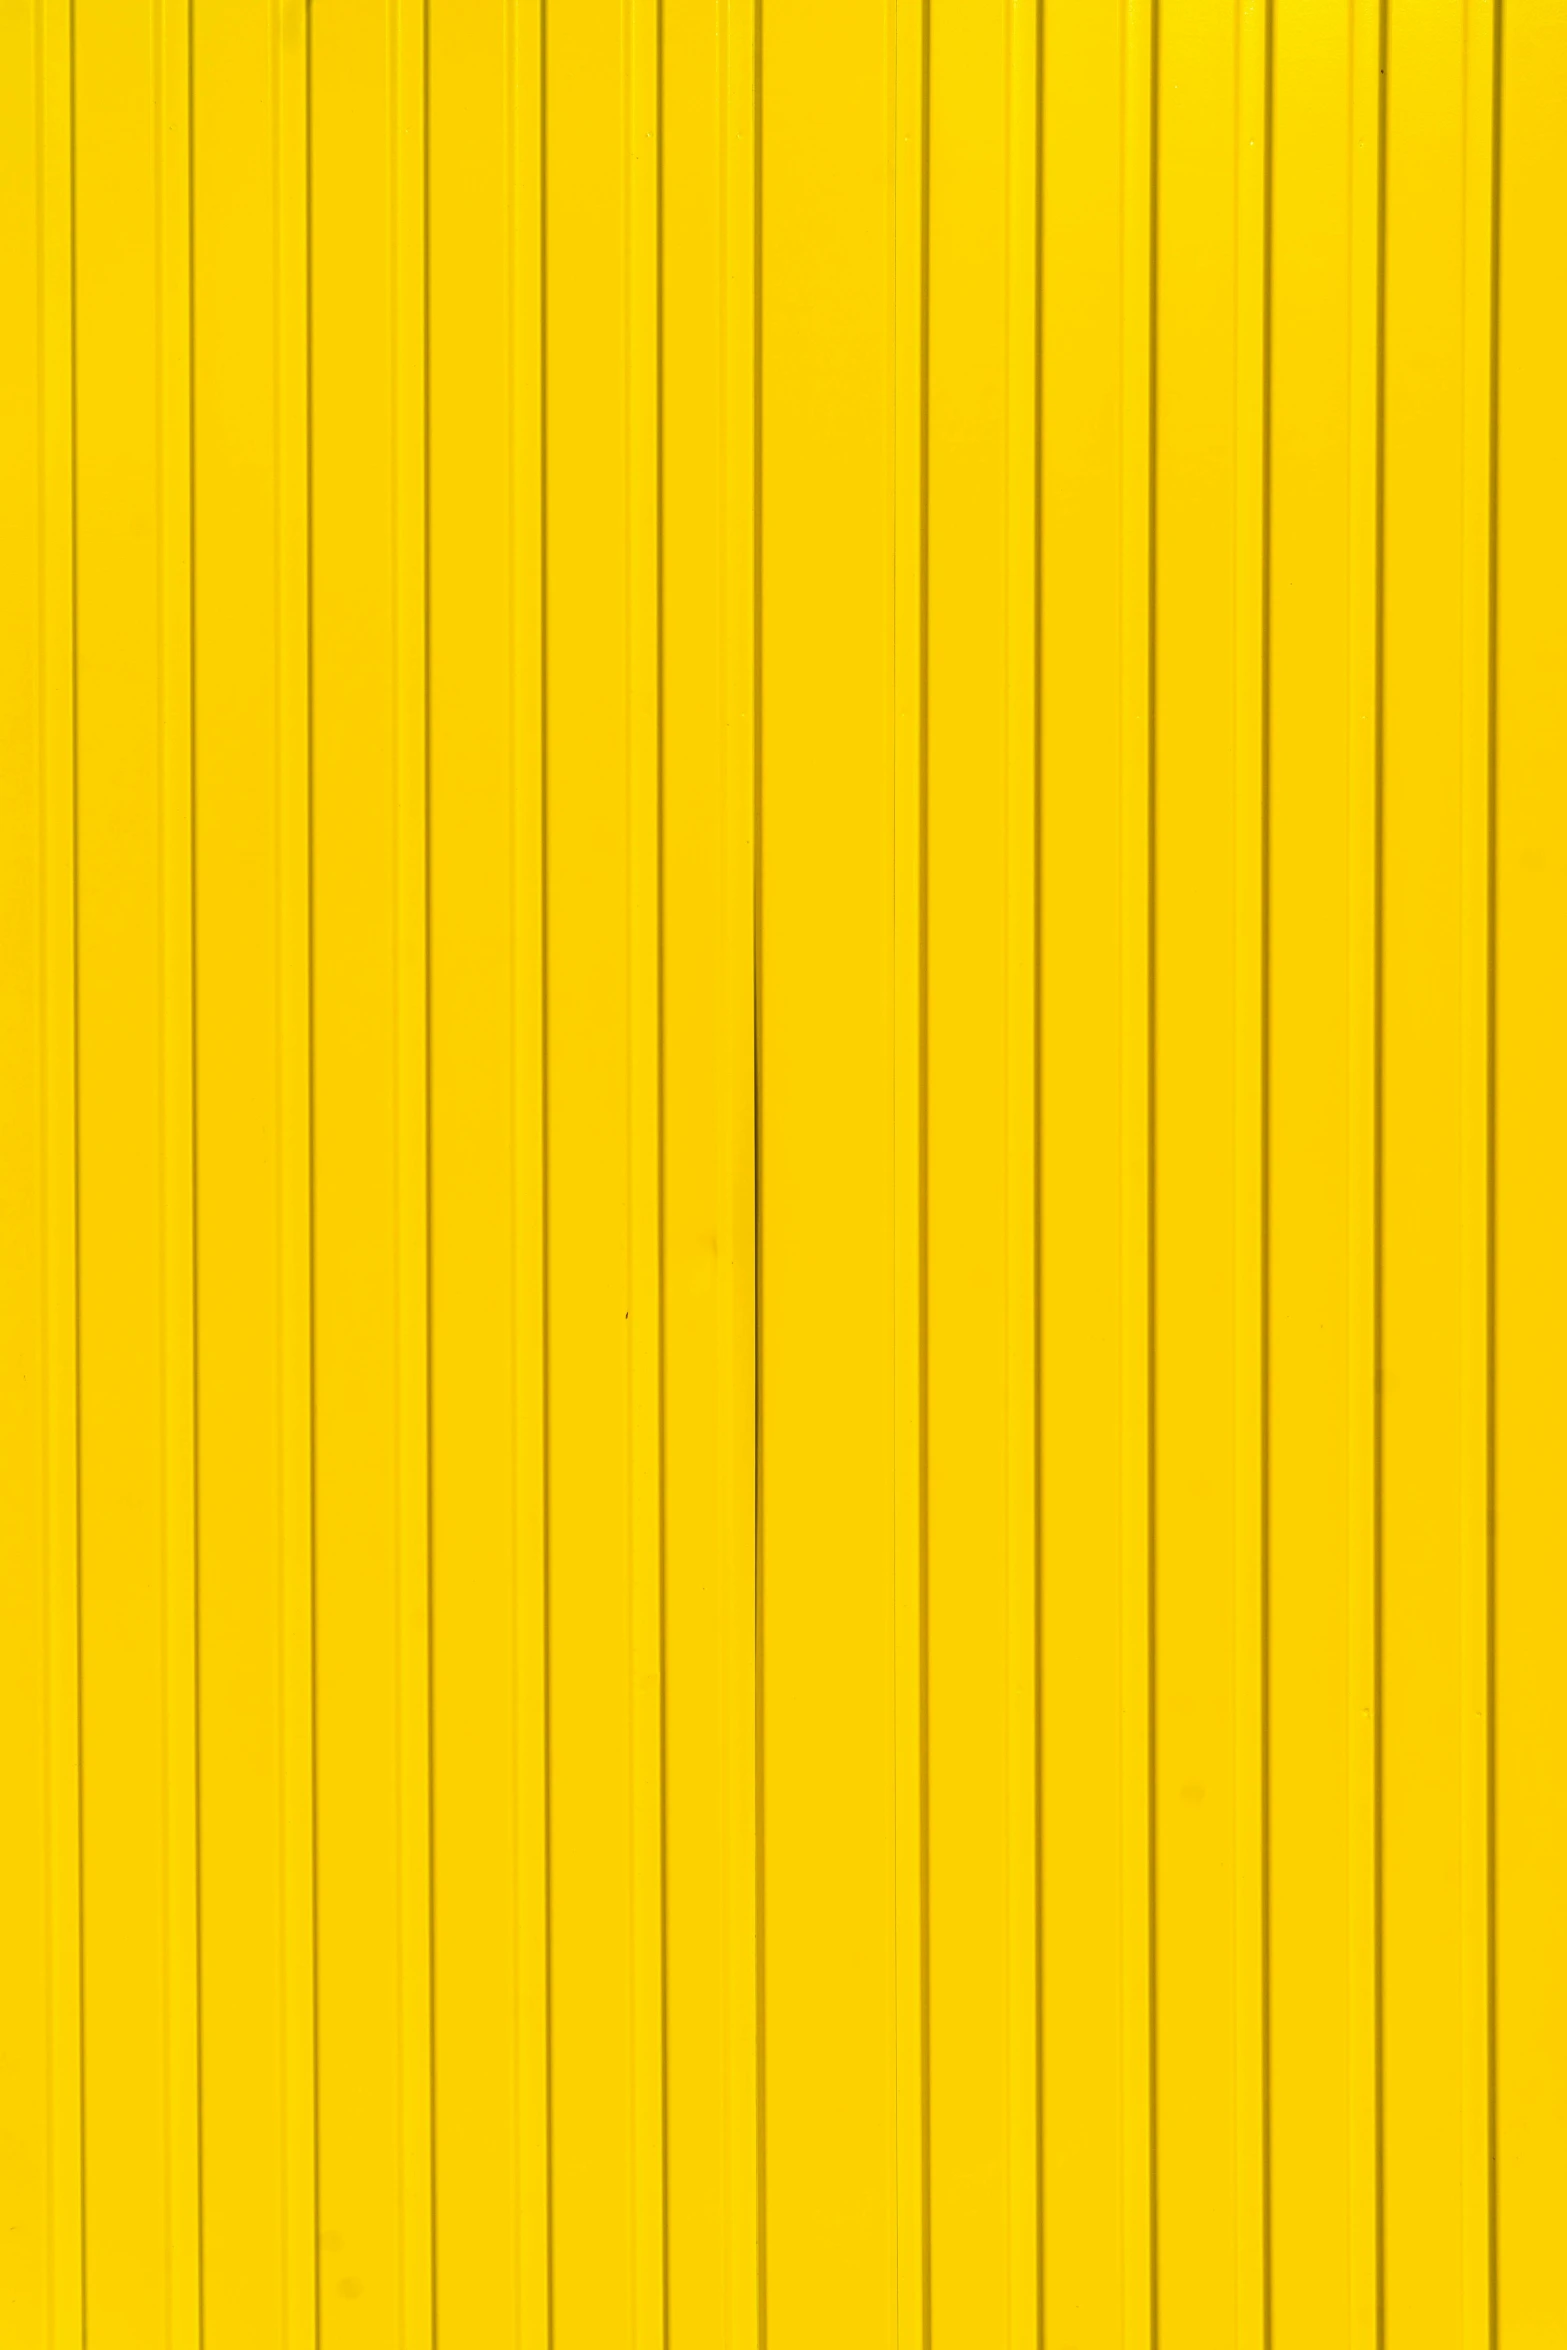 the image is of yellow painted on a wall